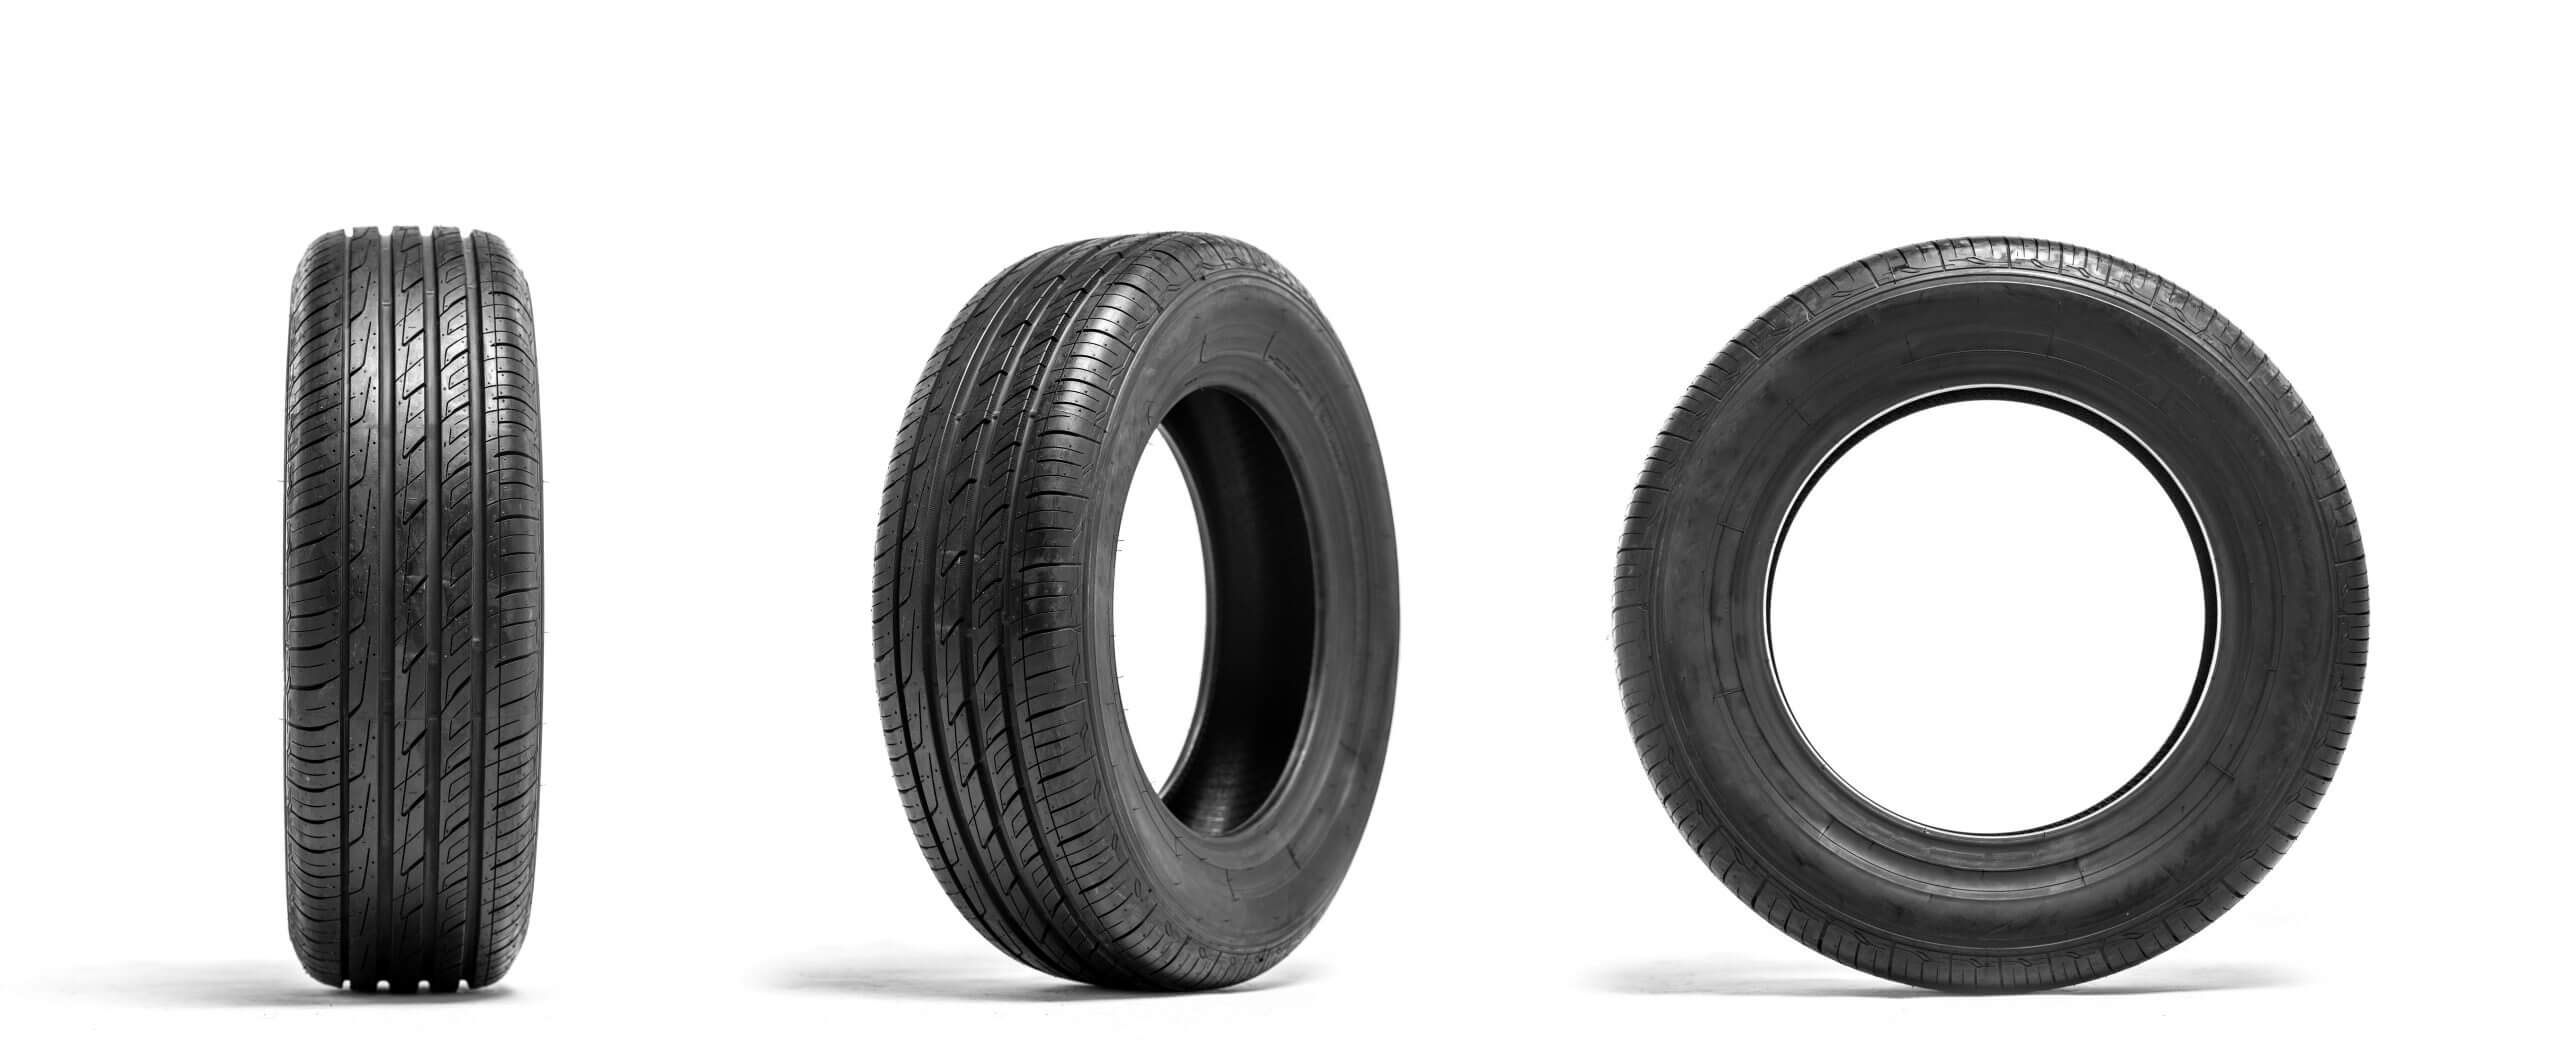 New car tires isolated on white background. Tyre service or shop advertising